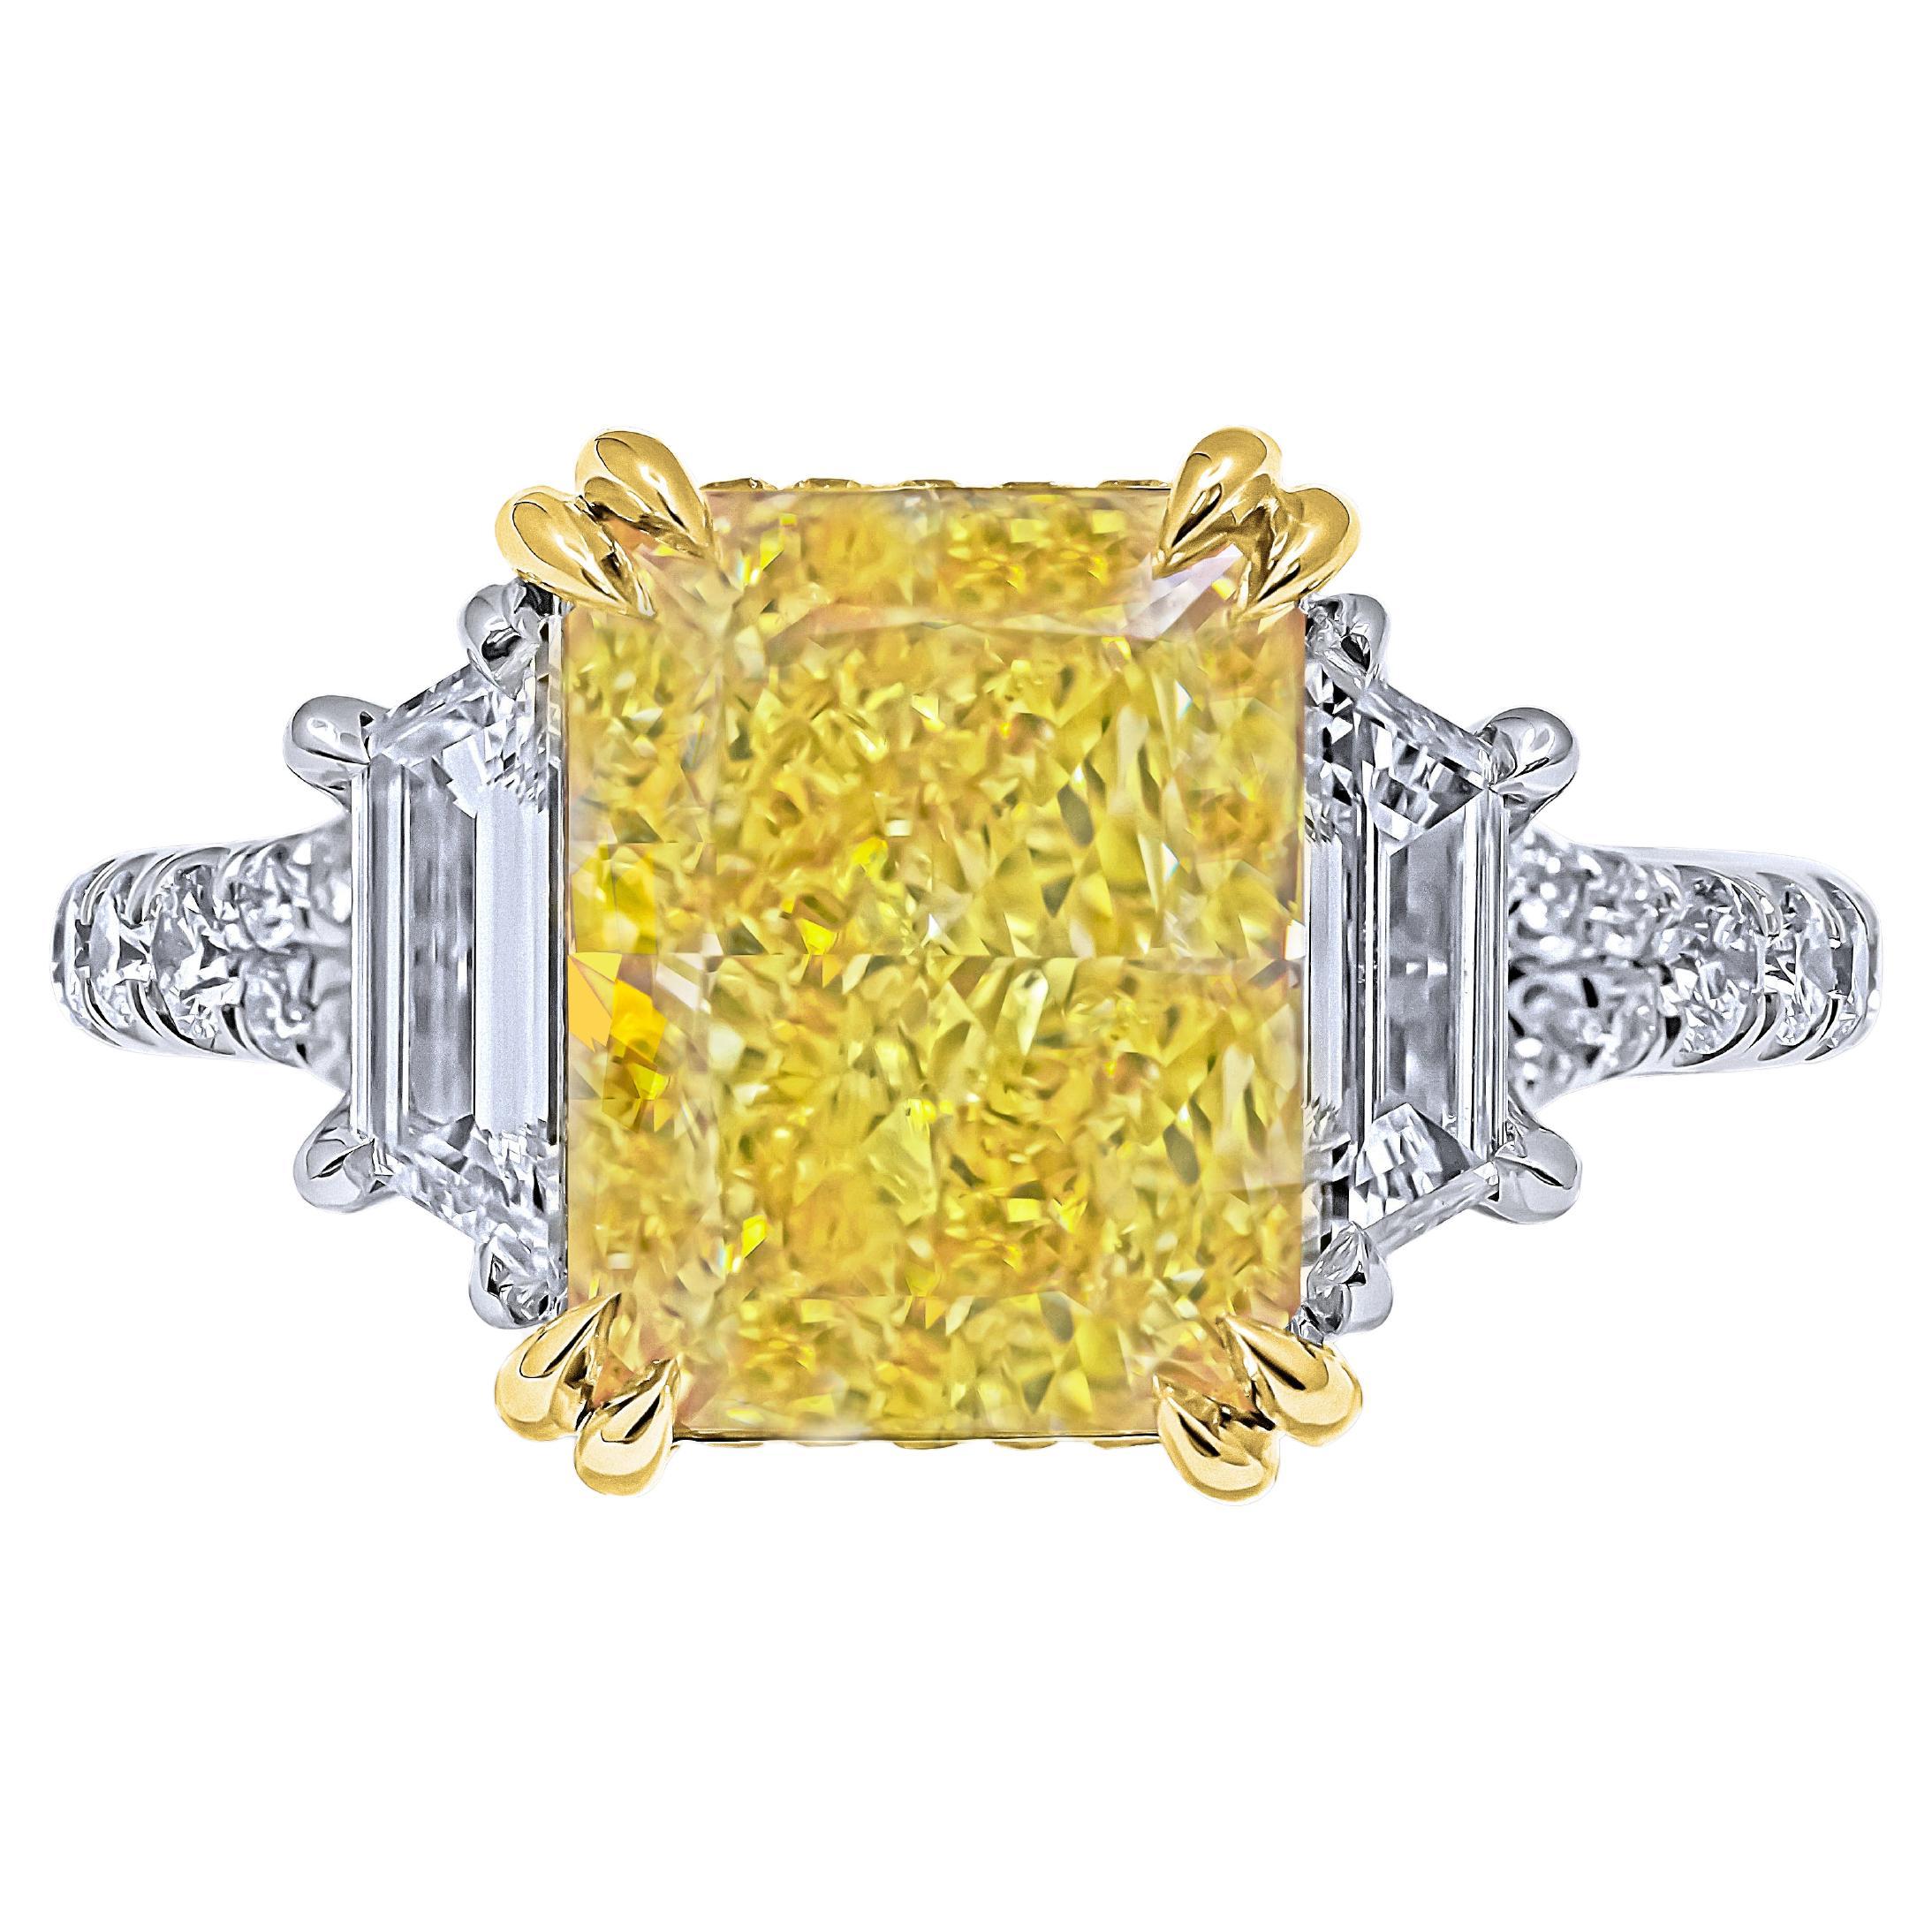 Introducing our exquisite 18K Yellow Gold and Platinum Ring, featuring a breathtaking centerpiece: a 5.02-carat Natural Fancy Intense Yellow Even SI2 Radiant Shape Diamond certified by GIA with the identification number GIA#1475020694. This